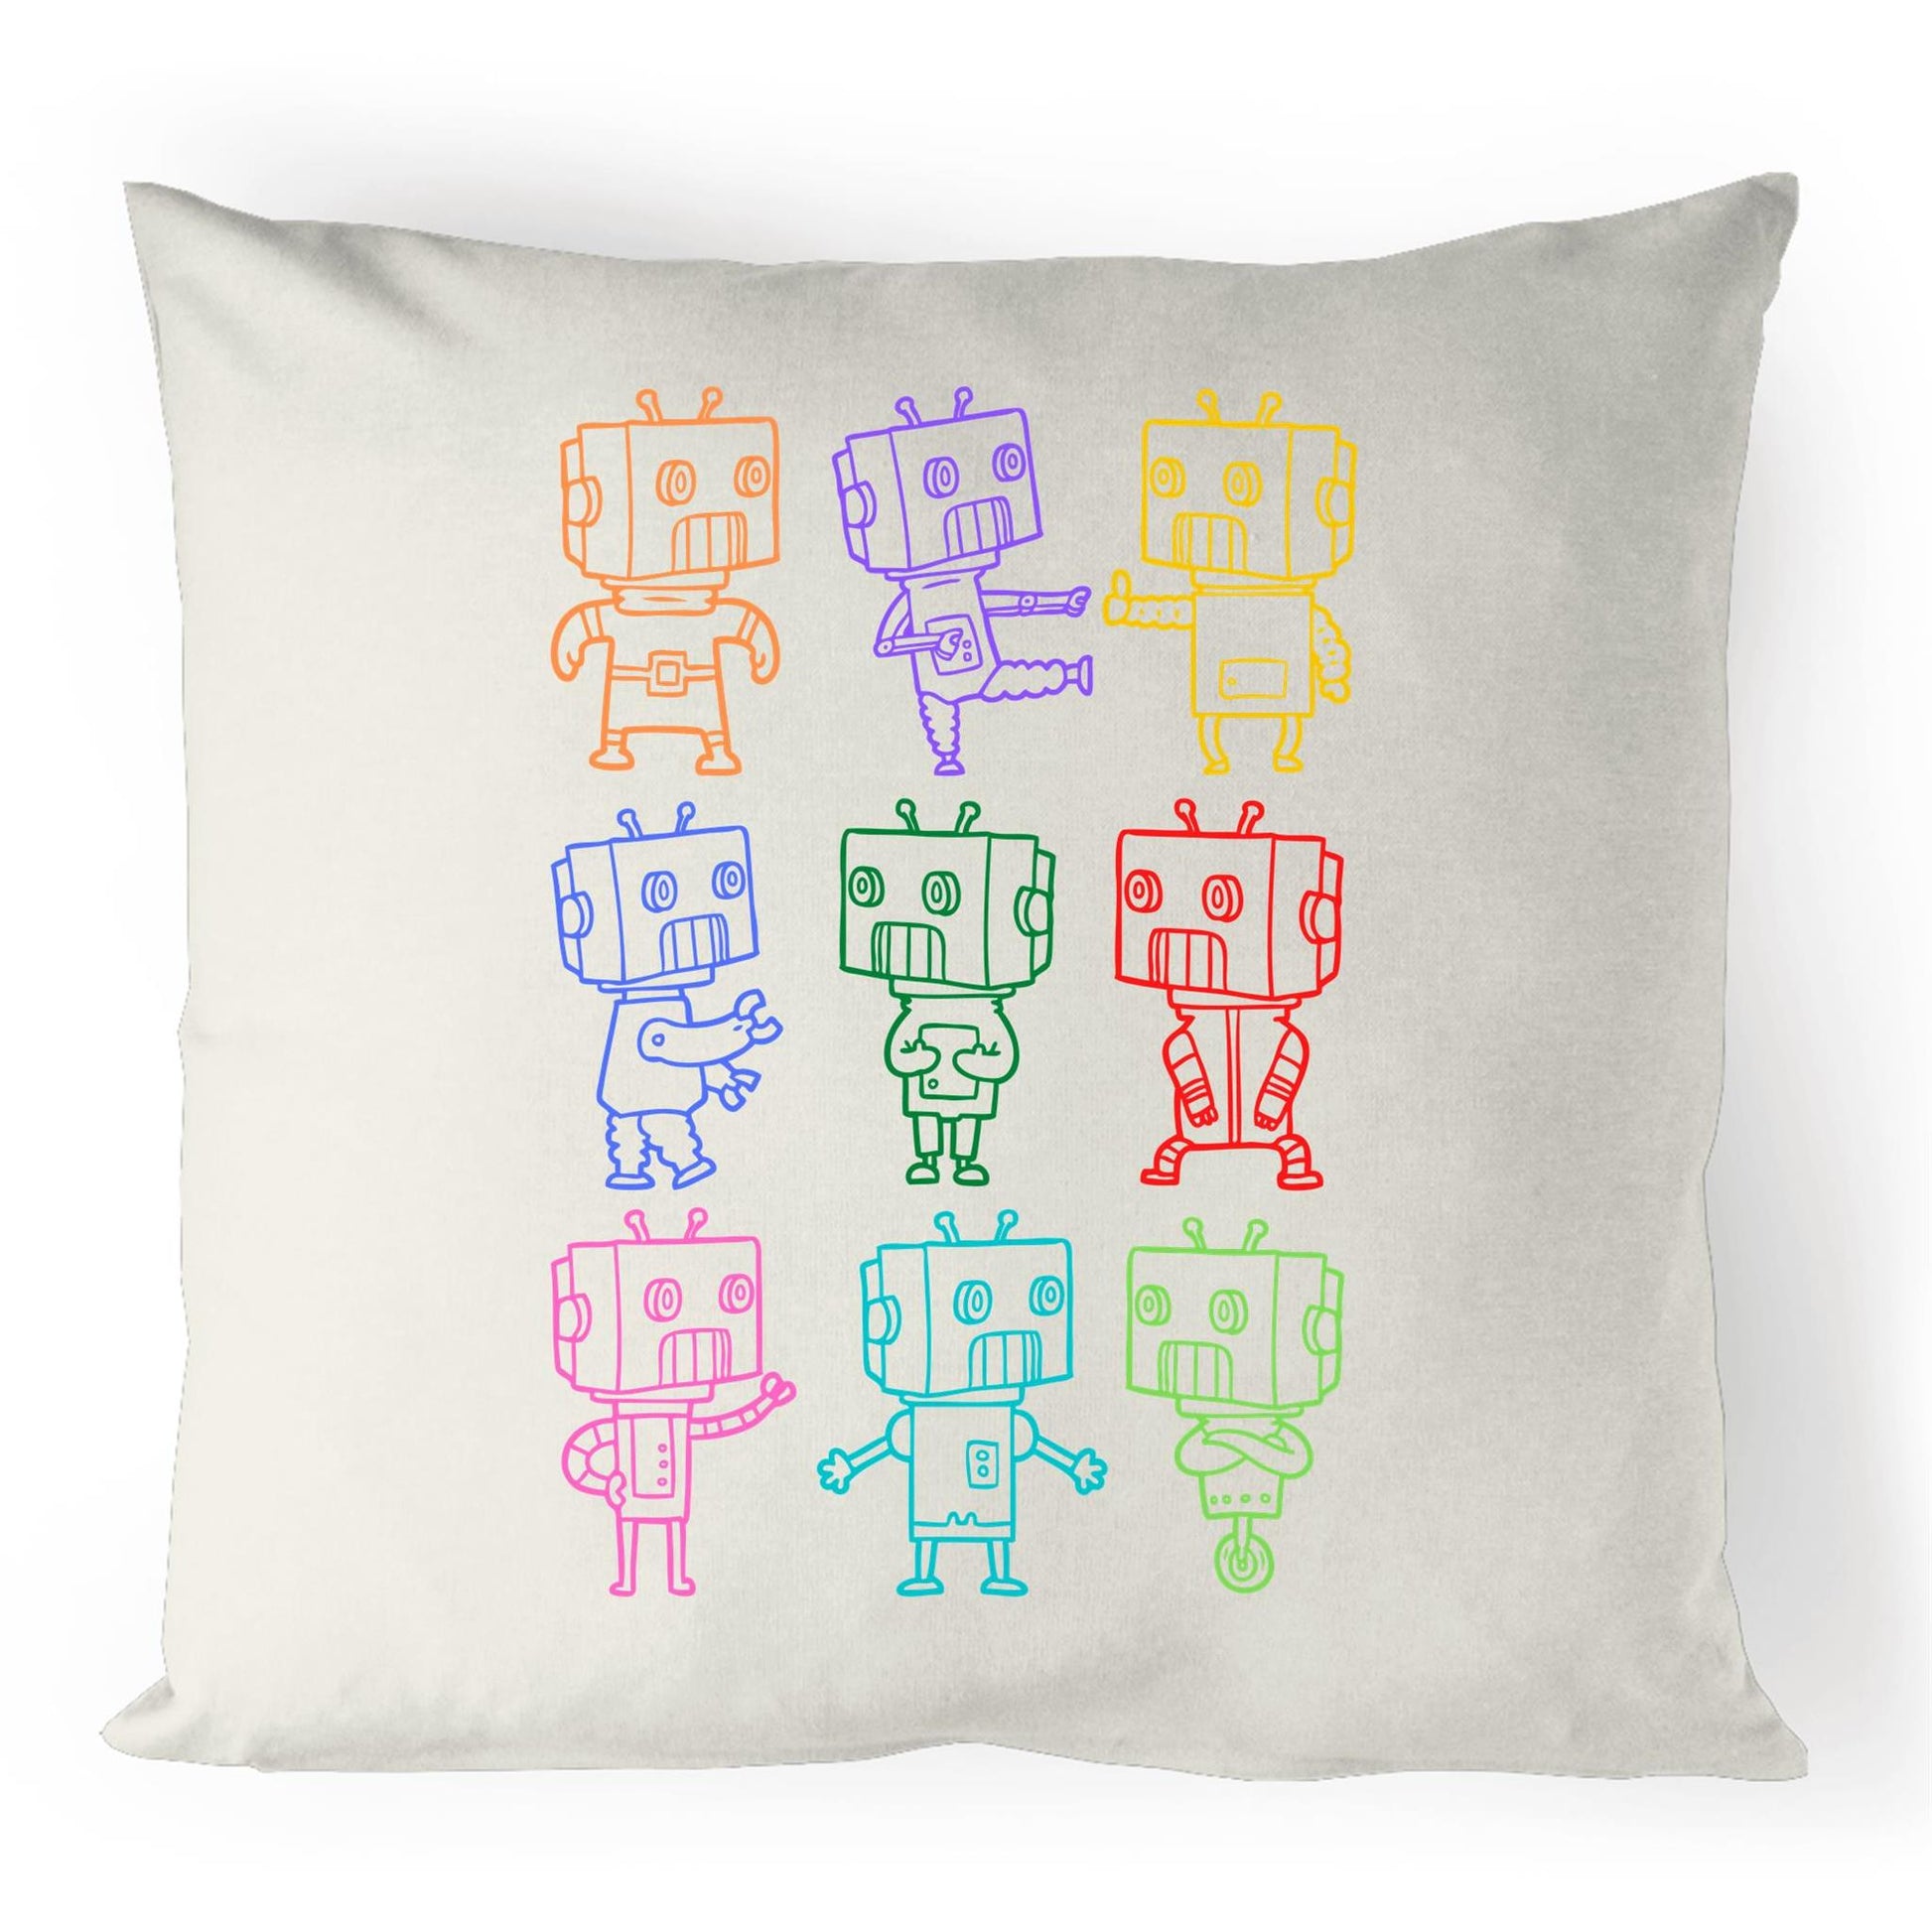 Robots - 100% Linen Cushion Cover Natural One-Size Linen Cushion Cover